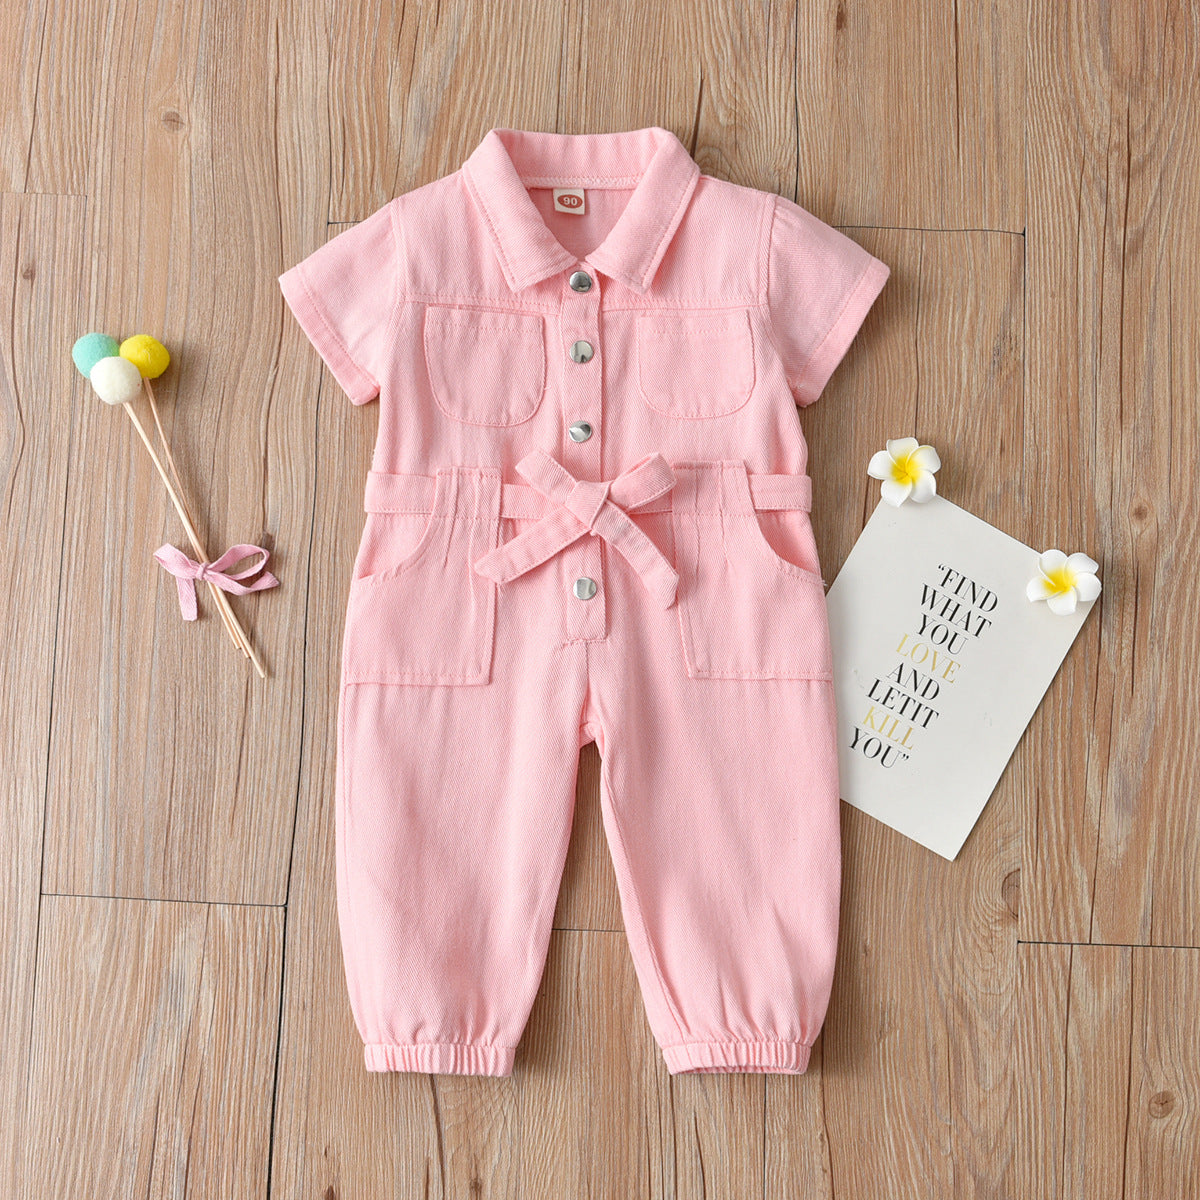 Girl's Denim Lapel One-piece Romper - different colors available